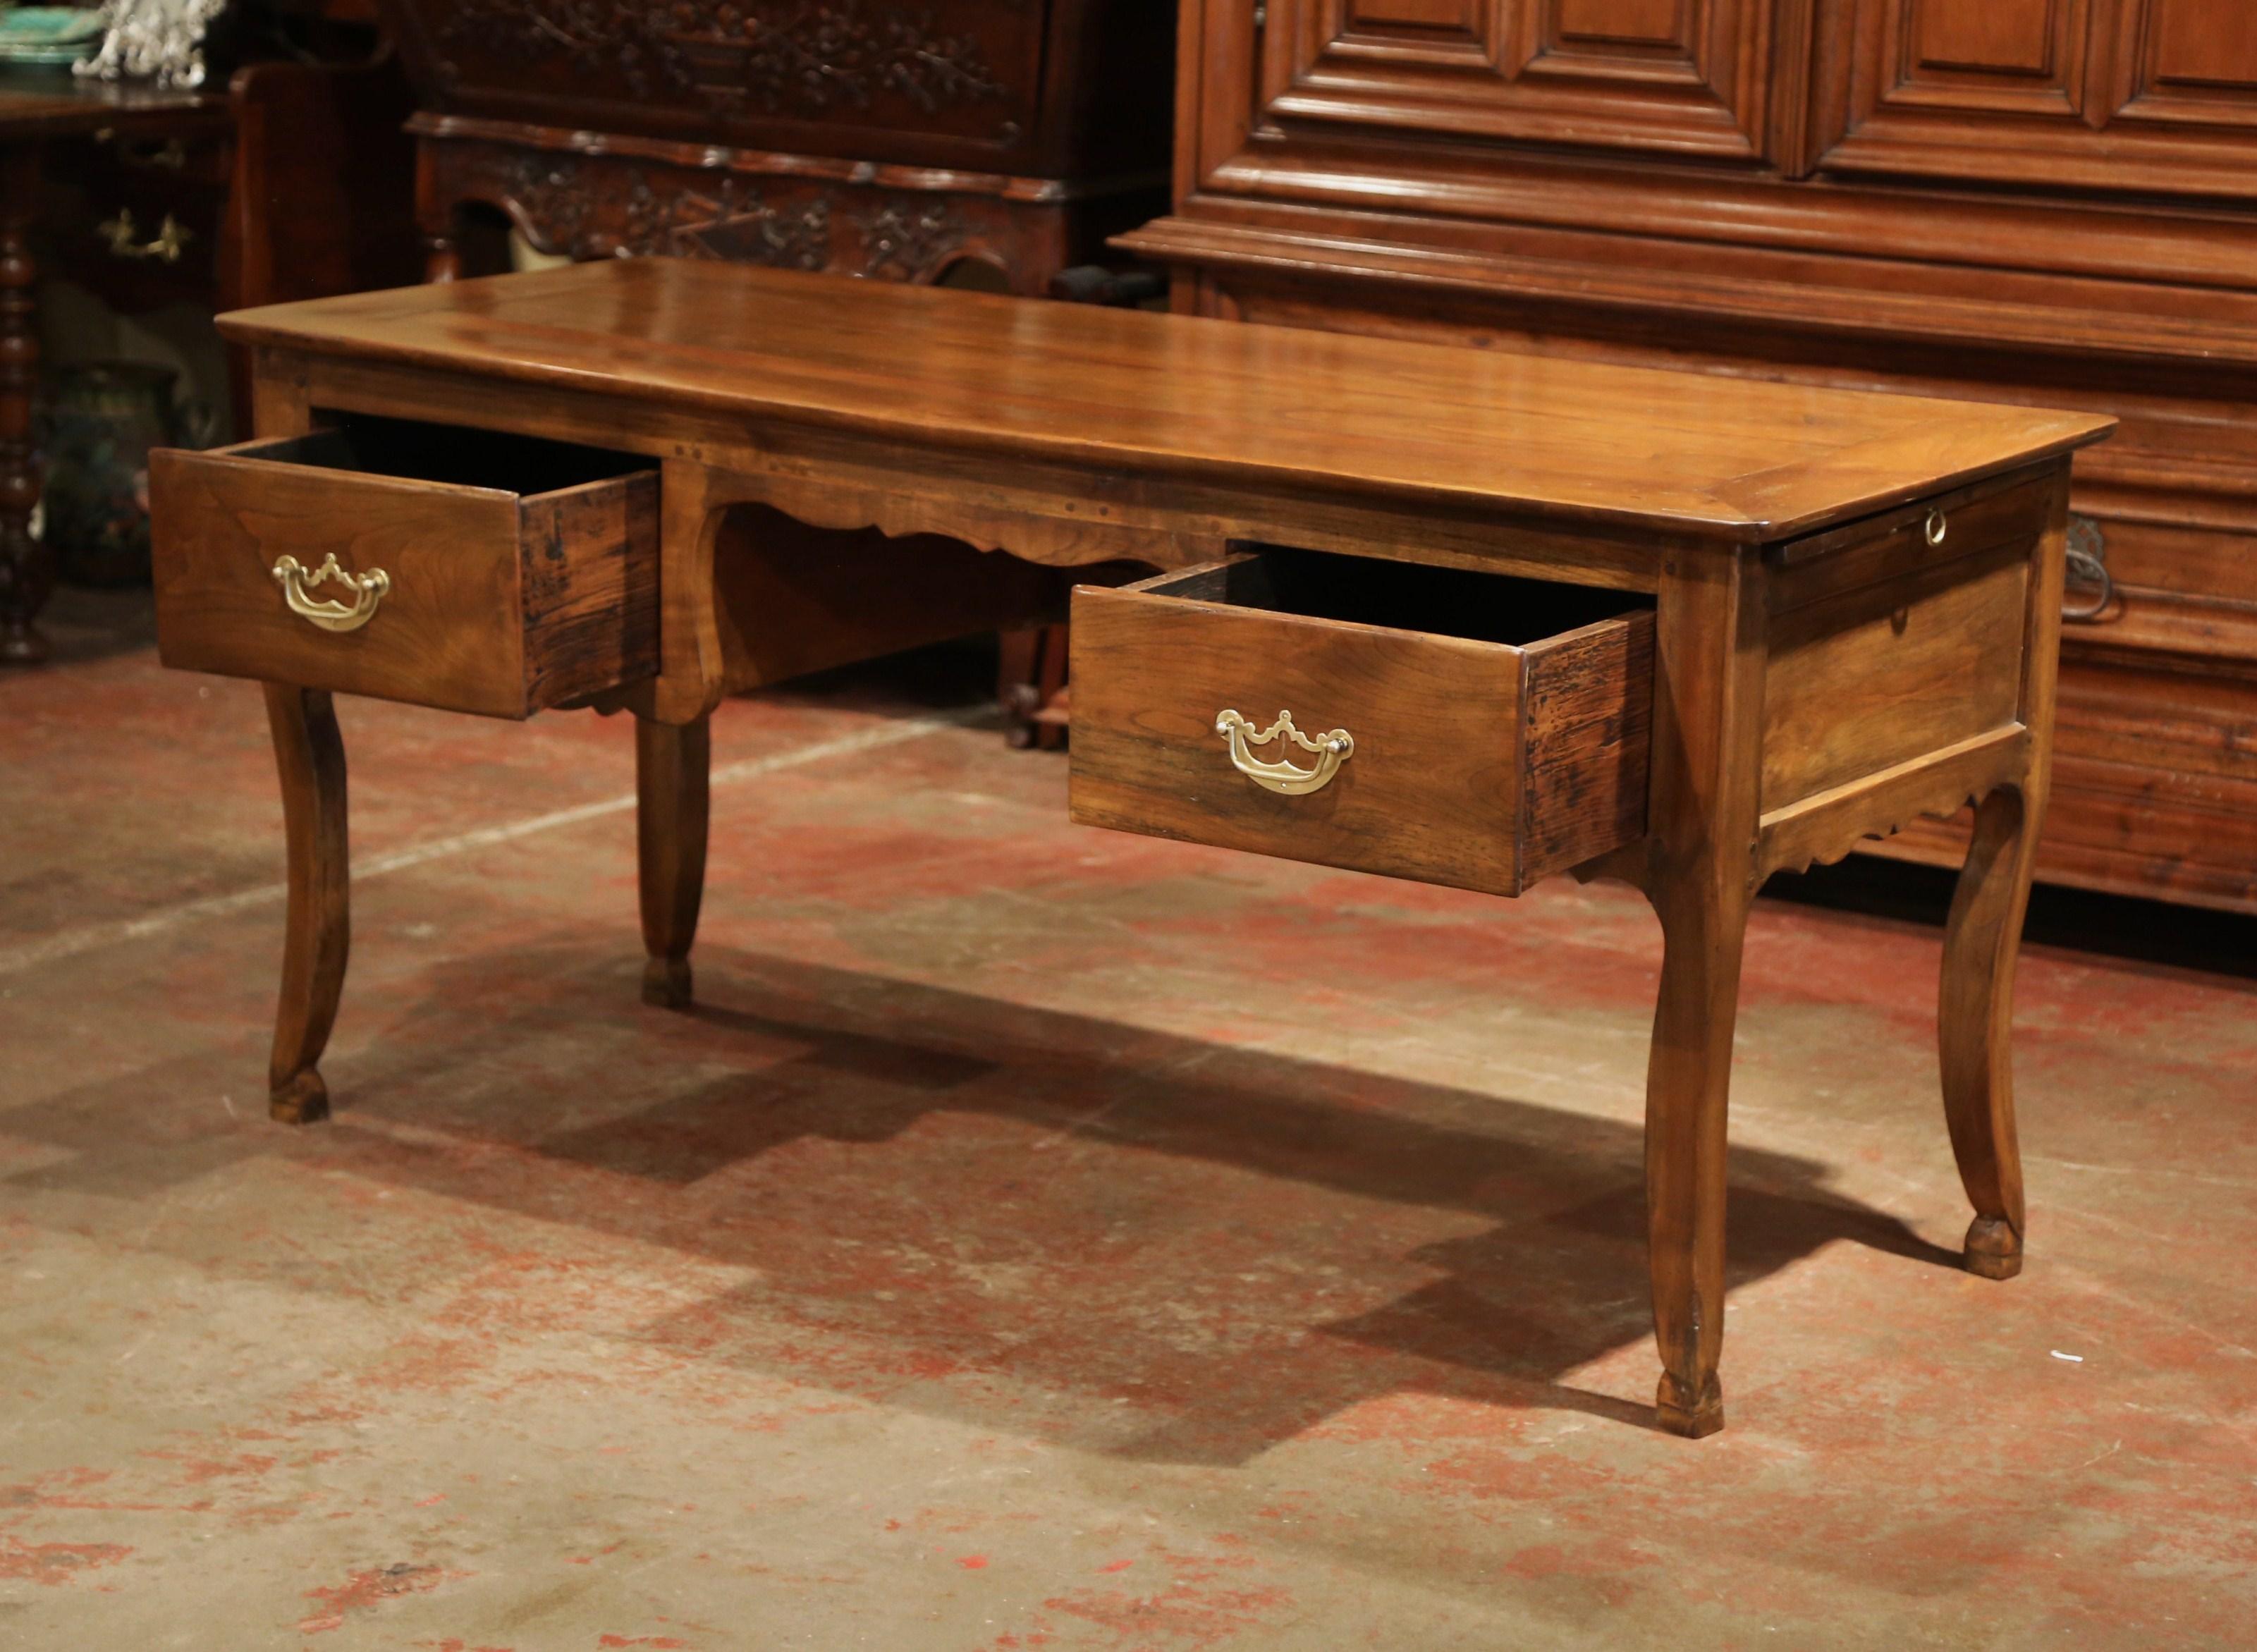 19th Century French Louis XV Carved Cherry Desk with Drawers and Pull Out Trays (Louis XV.)